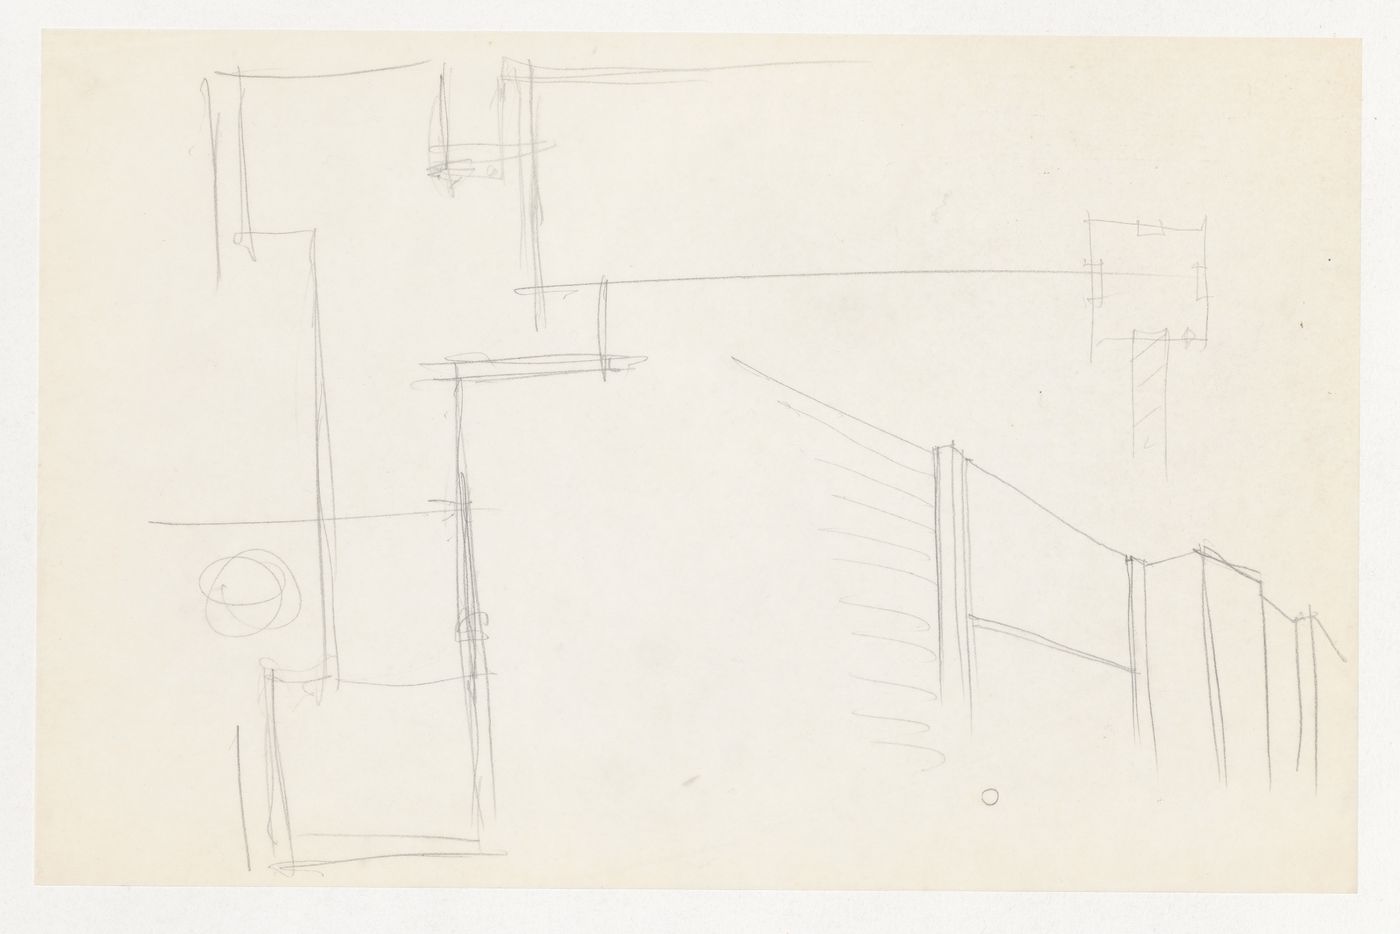 Interior perspective sketch showing a column, window mullion and wall connections and sketch sectional details for the Metallurgy Building, Illinois Institute of Technology, Chicago